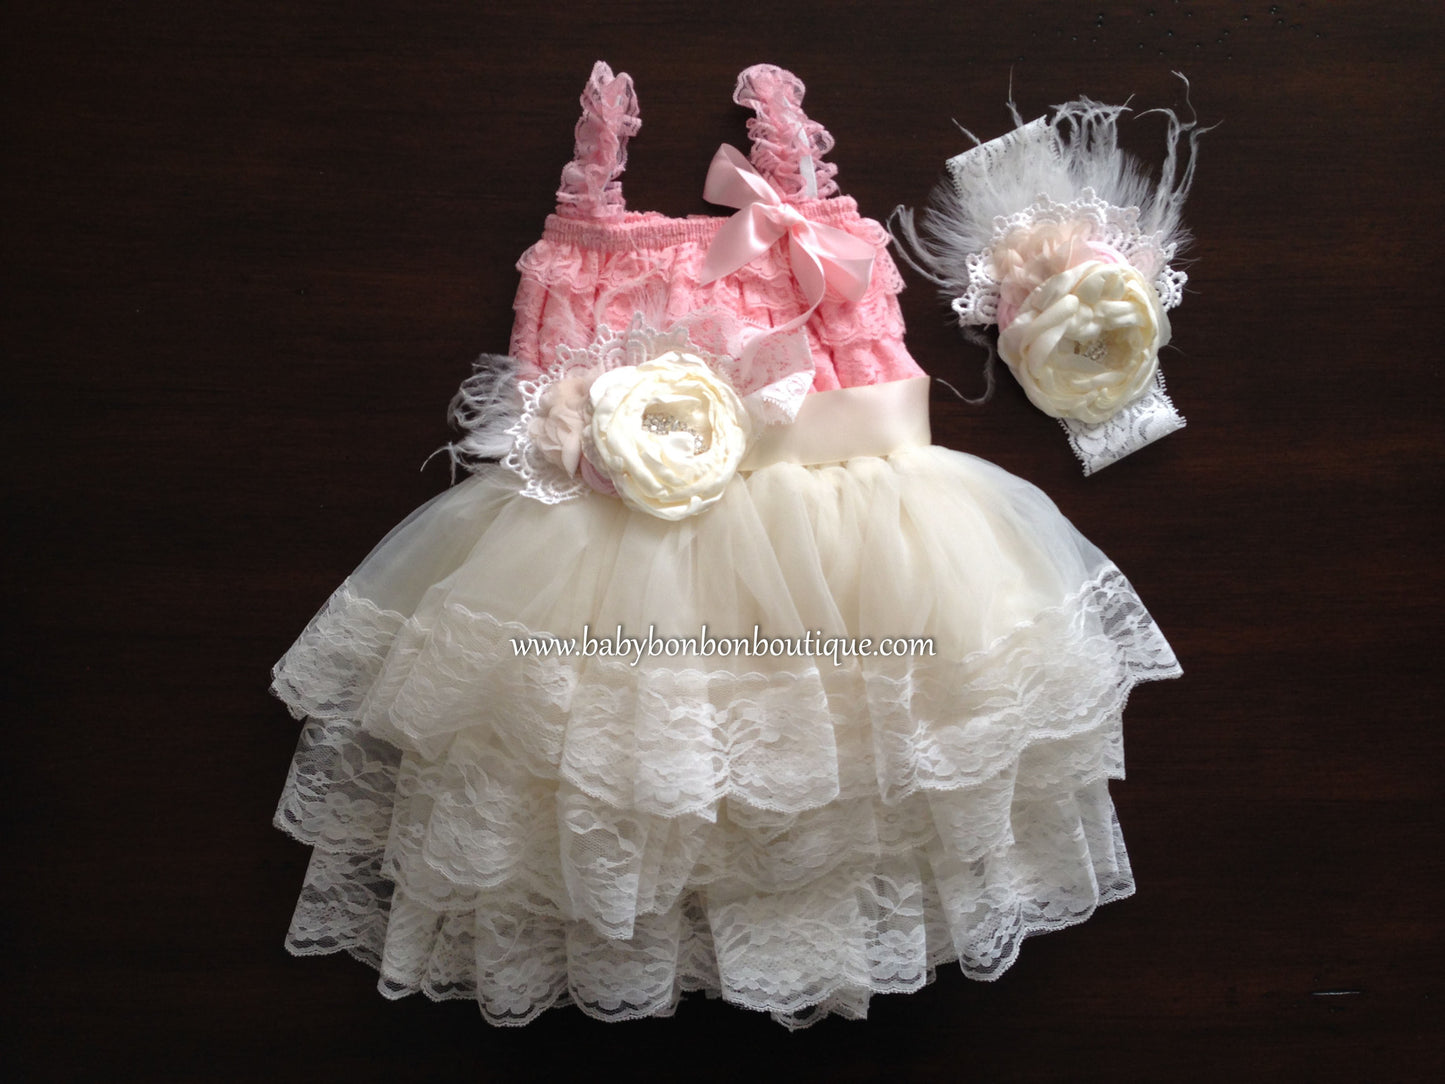 Pink Lace Romper and Ivory Fluffy Lace Skirt with Headband & Sash